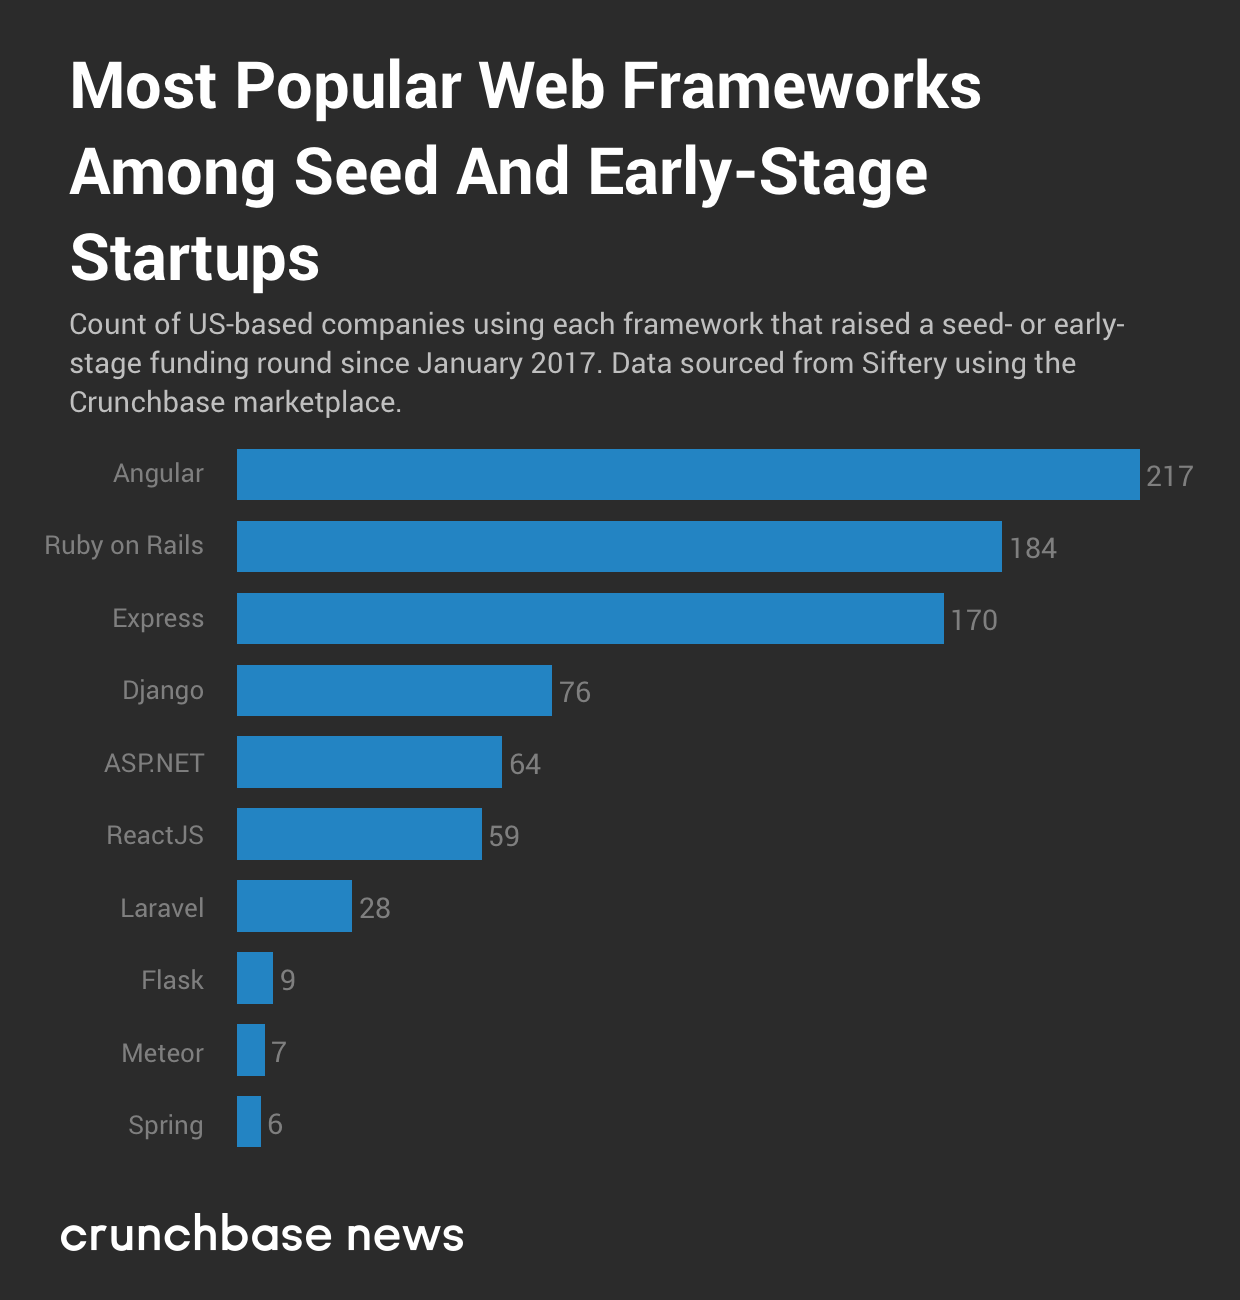 Most Popular Web Frameworks Among Seed and Early-Stage Startups by Crunchbase